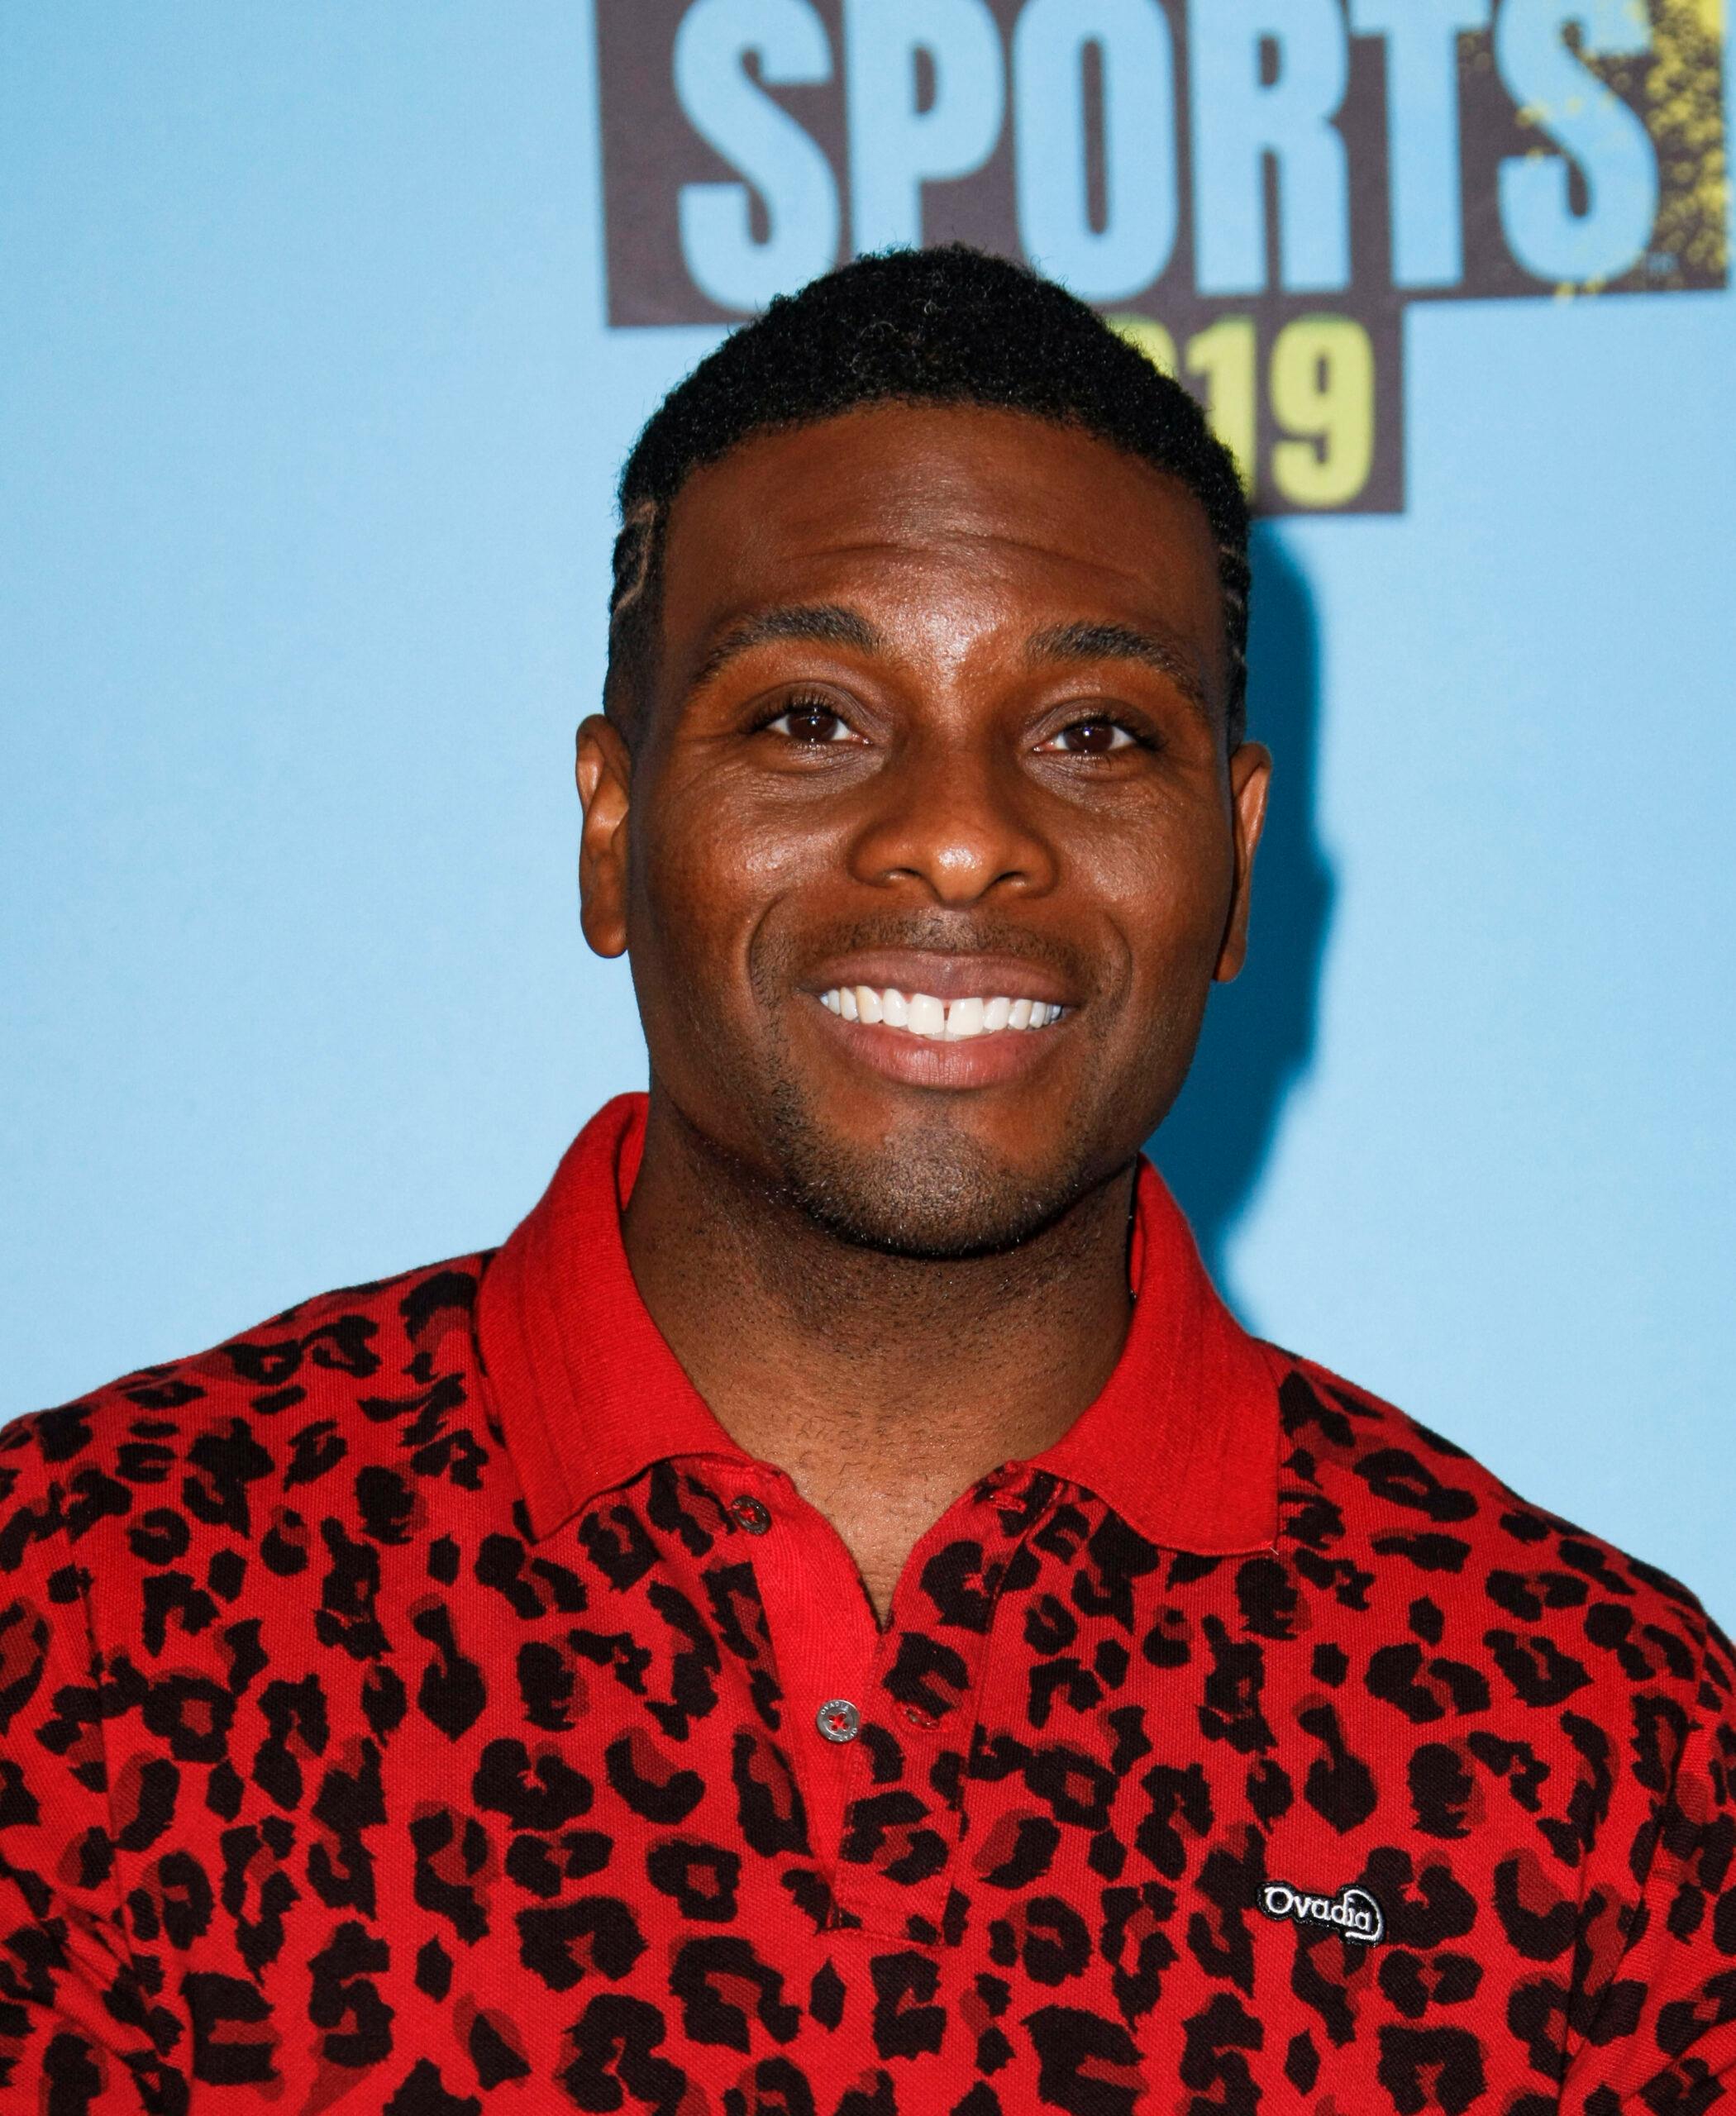 Kel Mitchell Reveals The 'Frightening' Health Issue That Sent Him To The Hospital